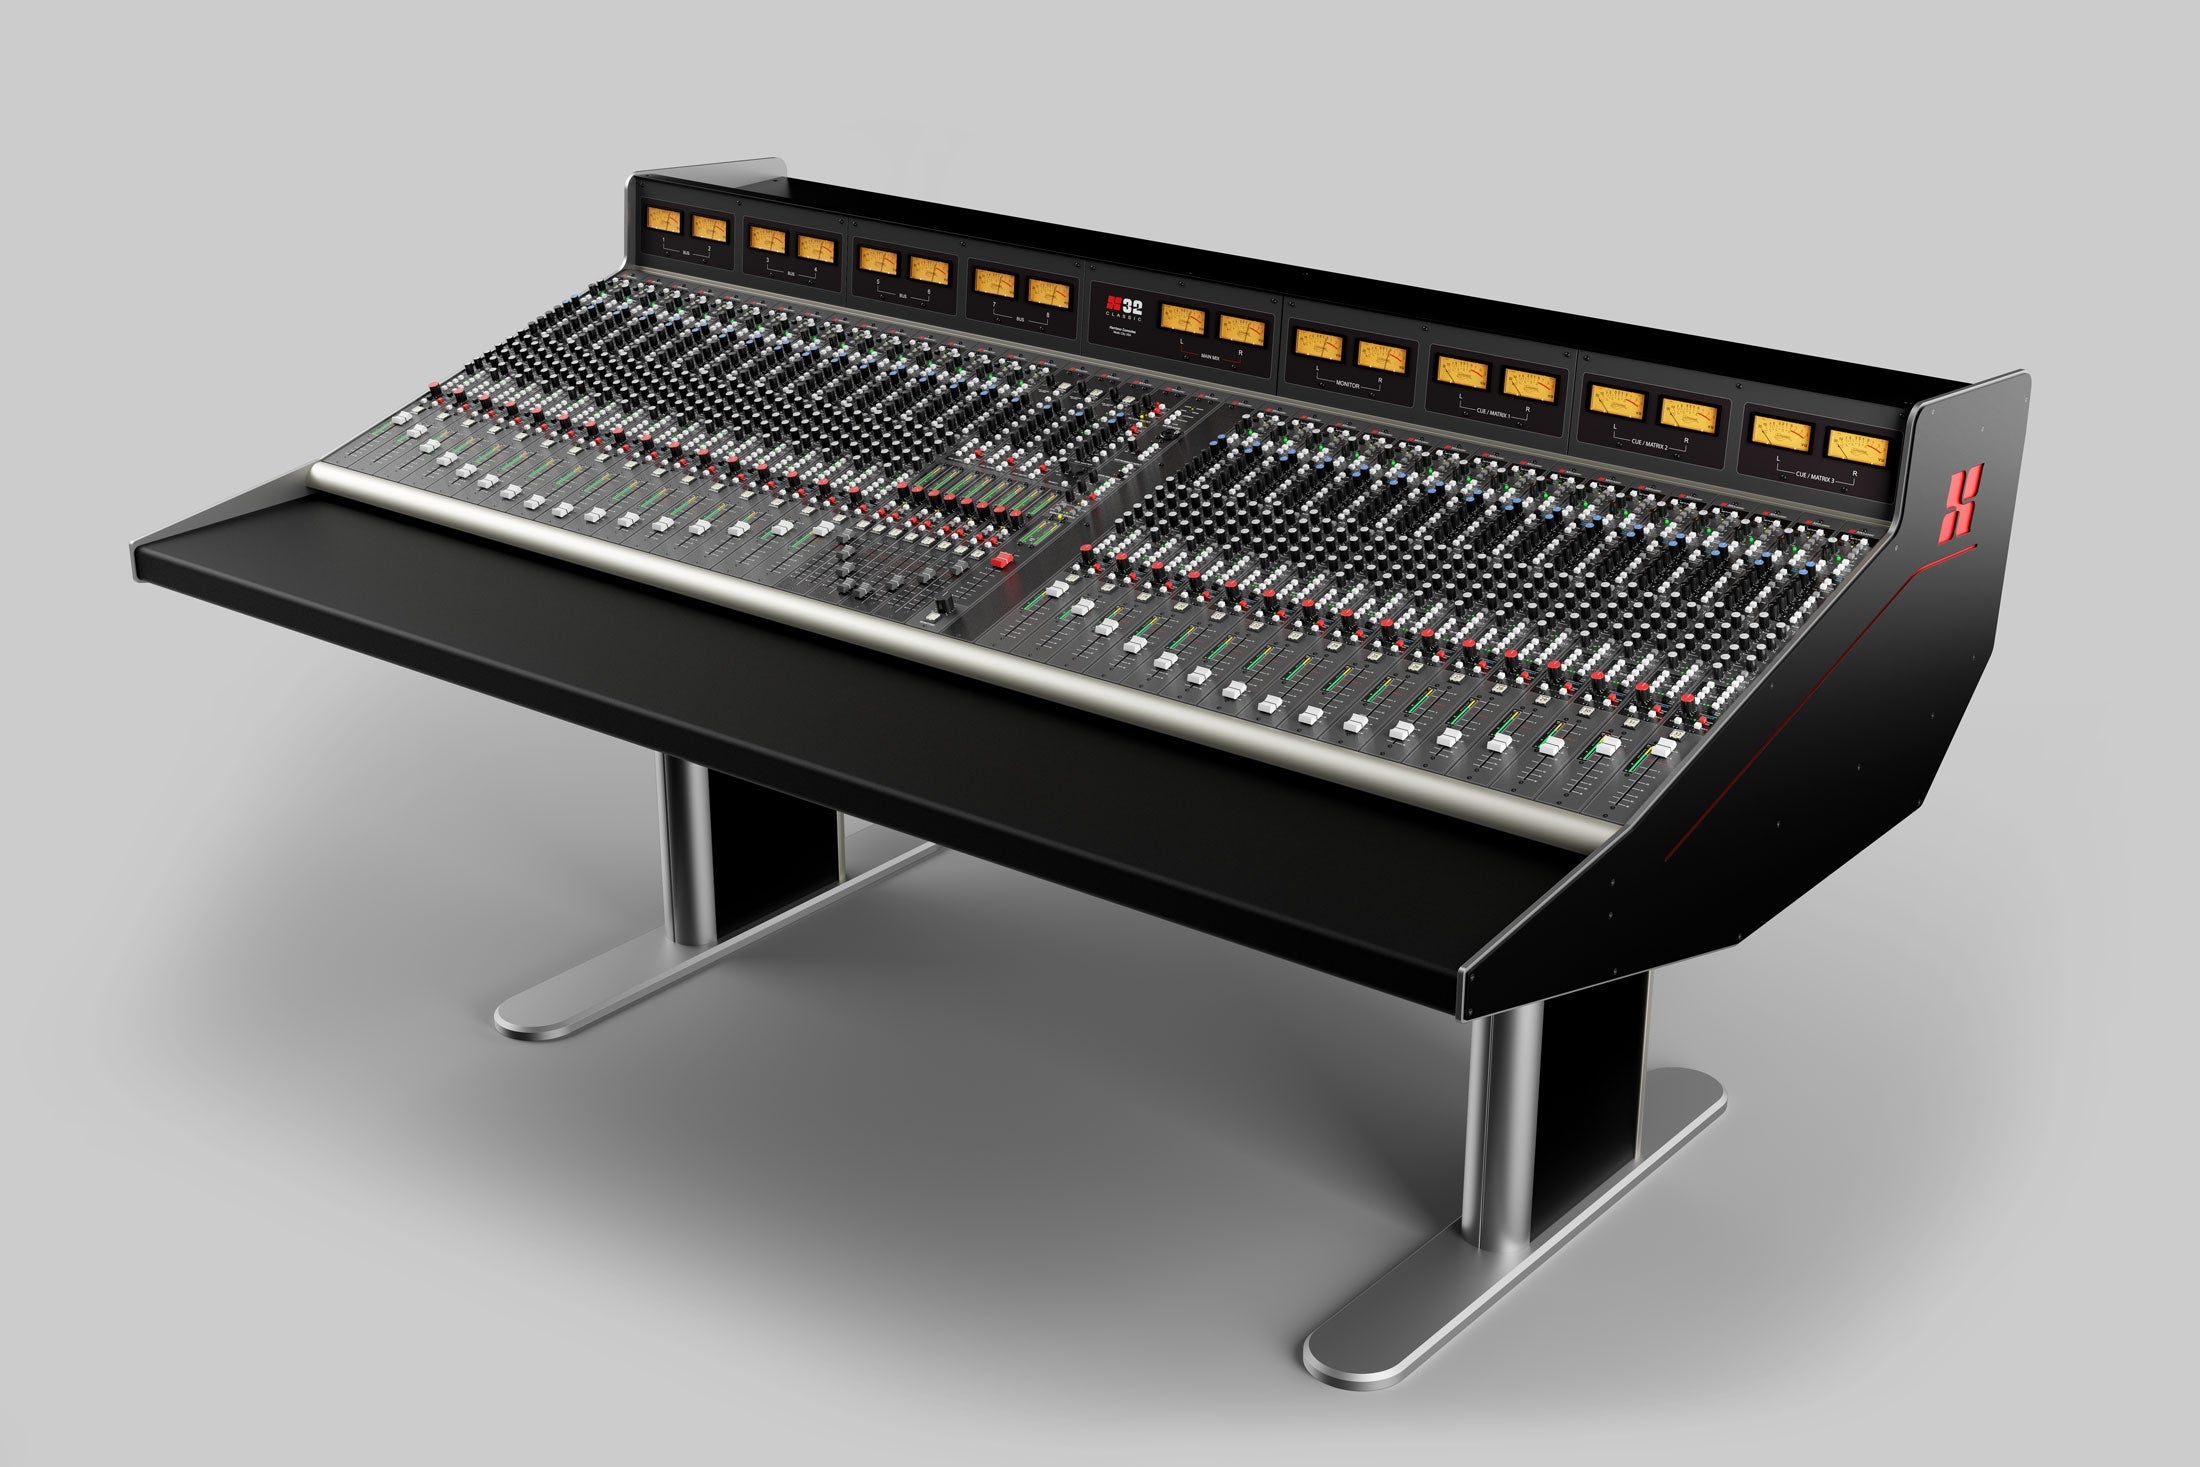 Harrison Audio 48 channel inline console fitted with 96 channels, Dante IO inbuilt